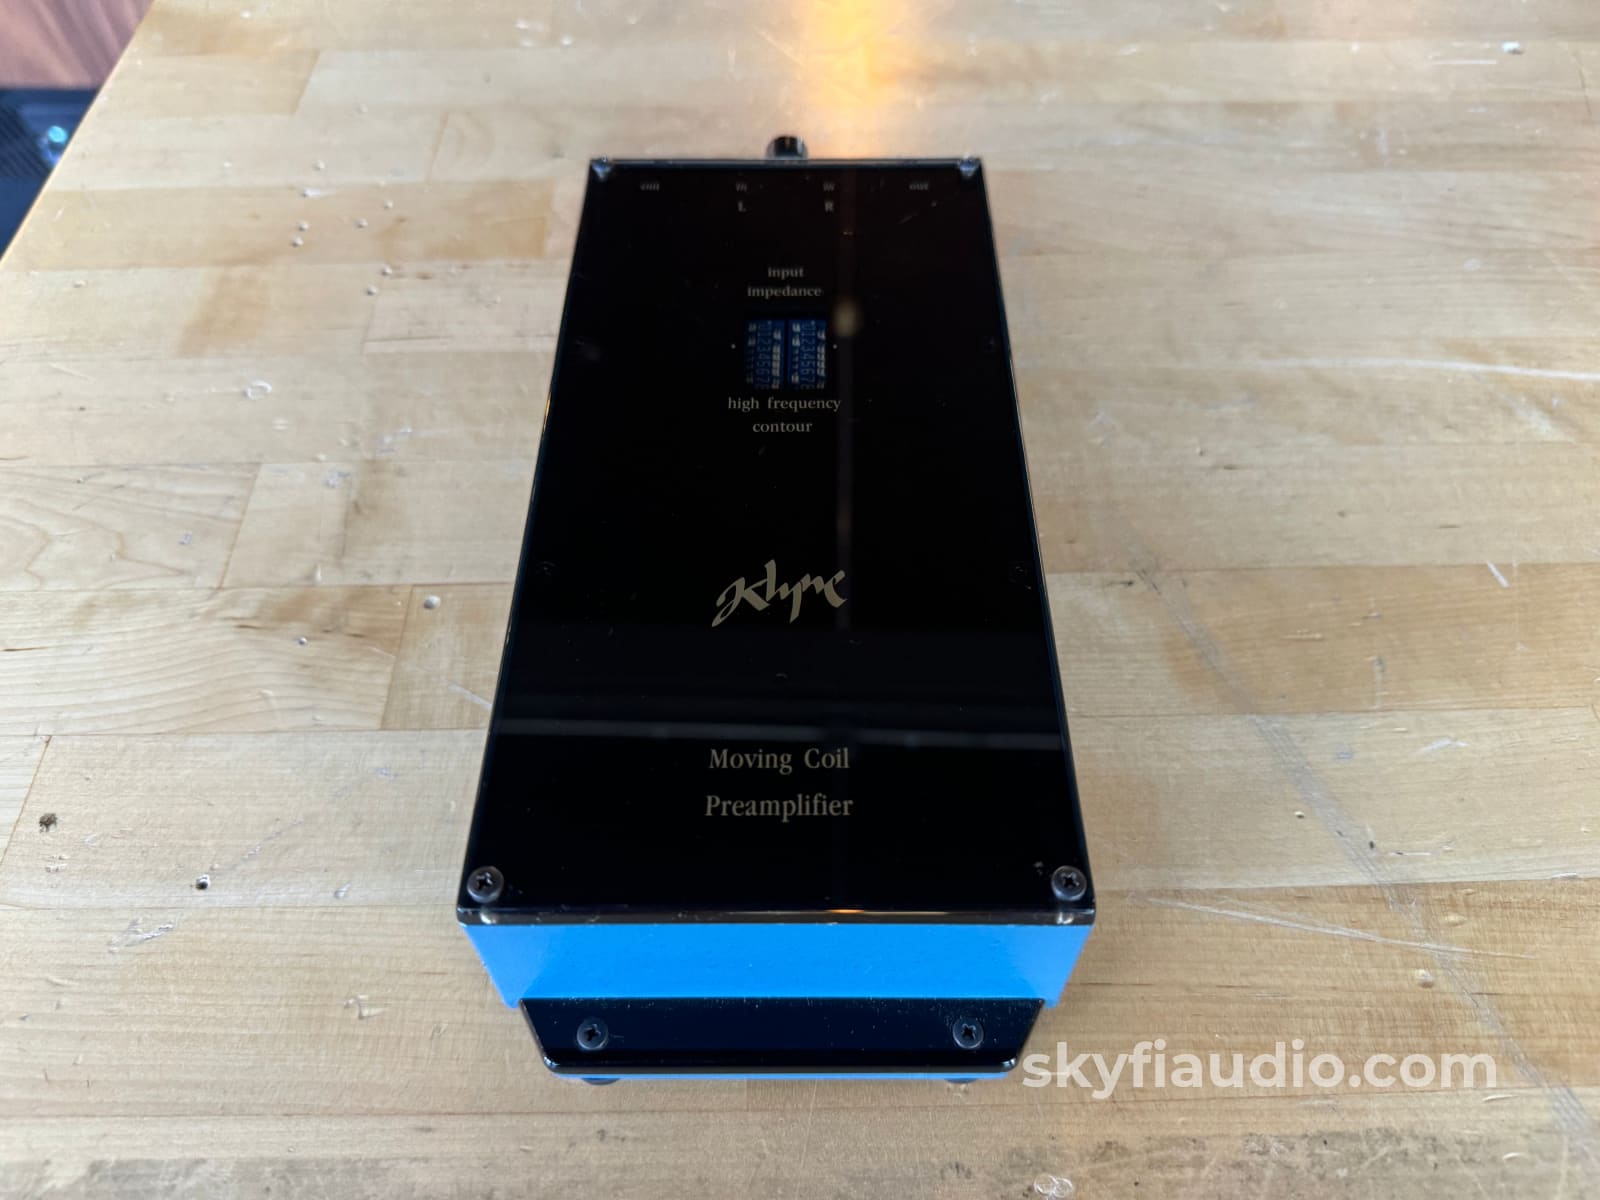 Klyne Sk-2A Moving Couil Step Up Phono Stage Preamplifier